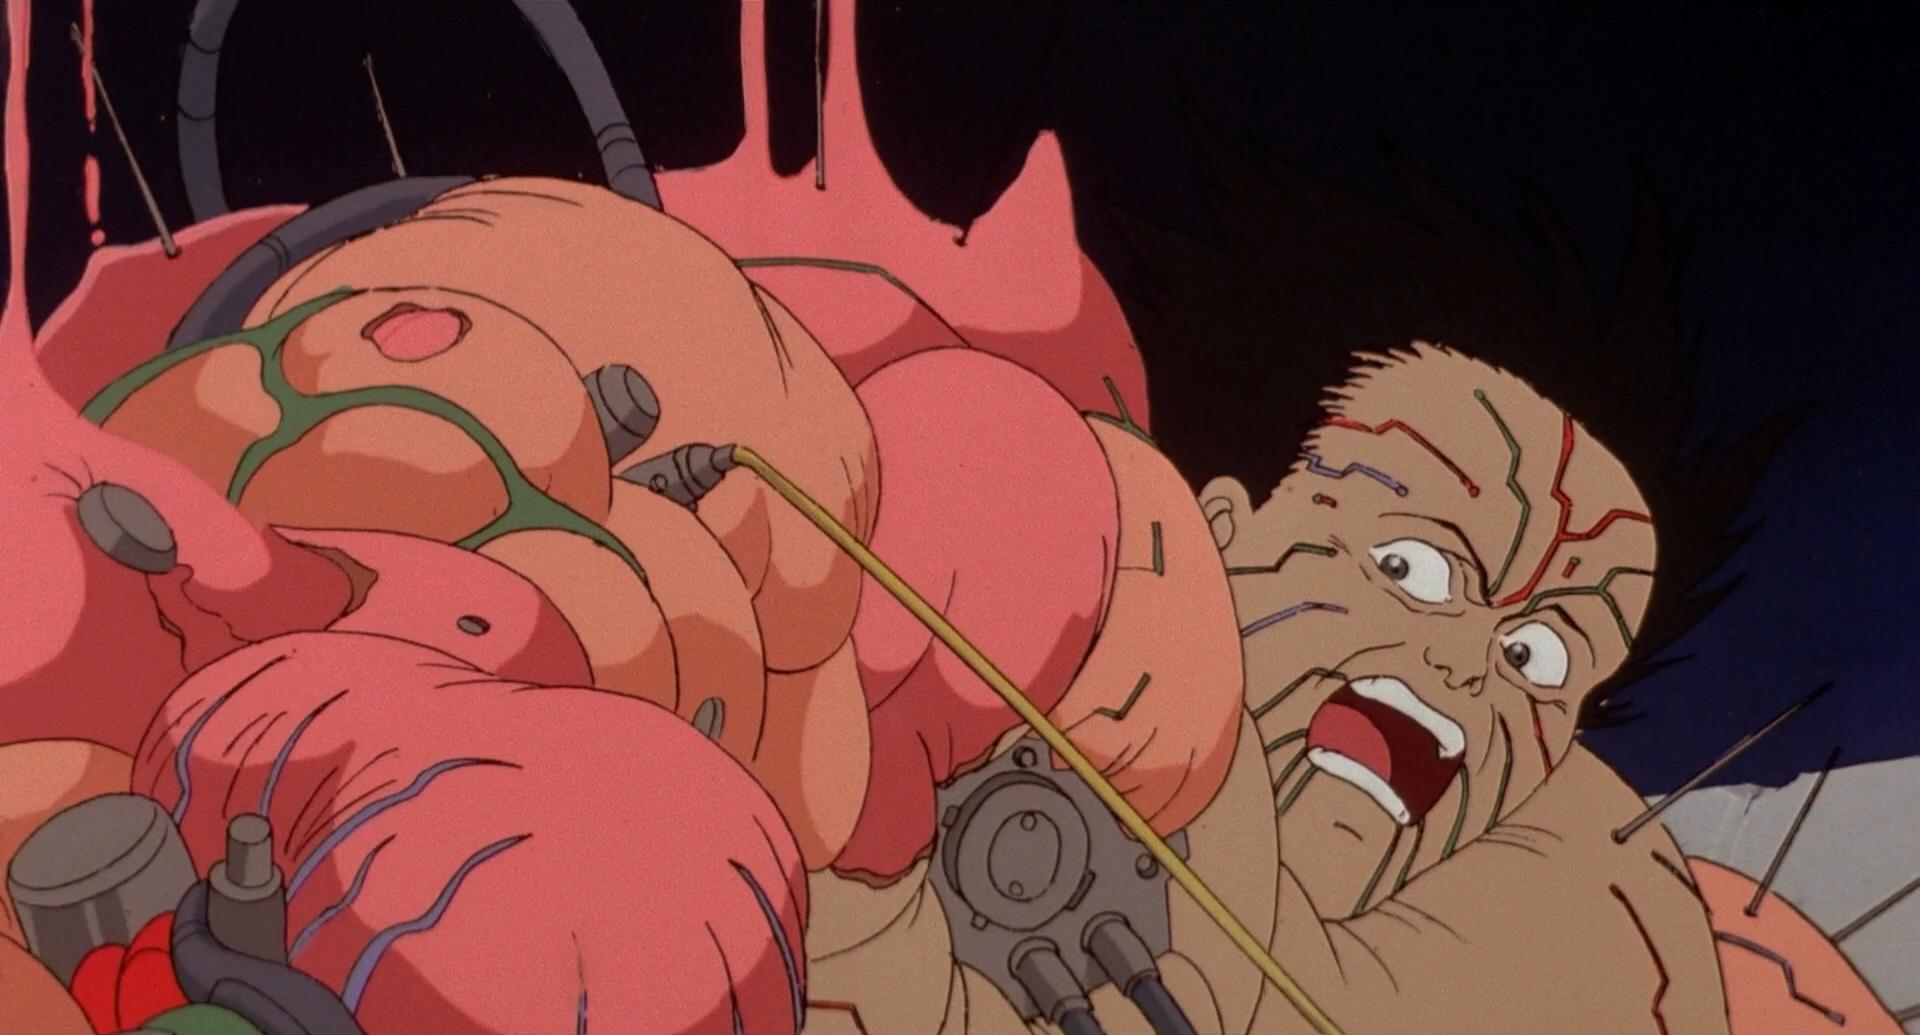 A still frame from the film Akira shows Tetsuo becoming mutated. His body balloons and wires and hoses protrude from his skin.